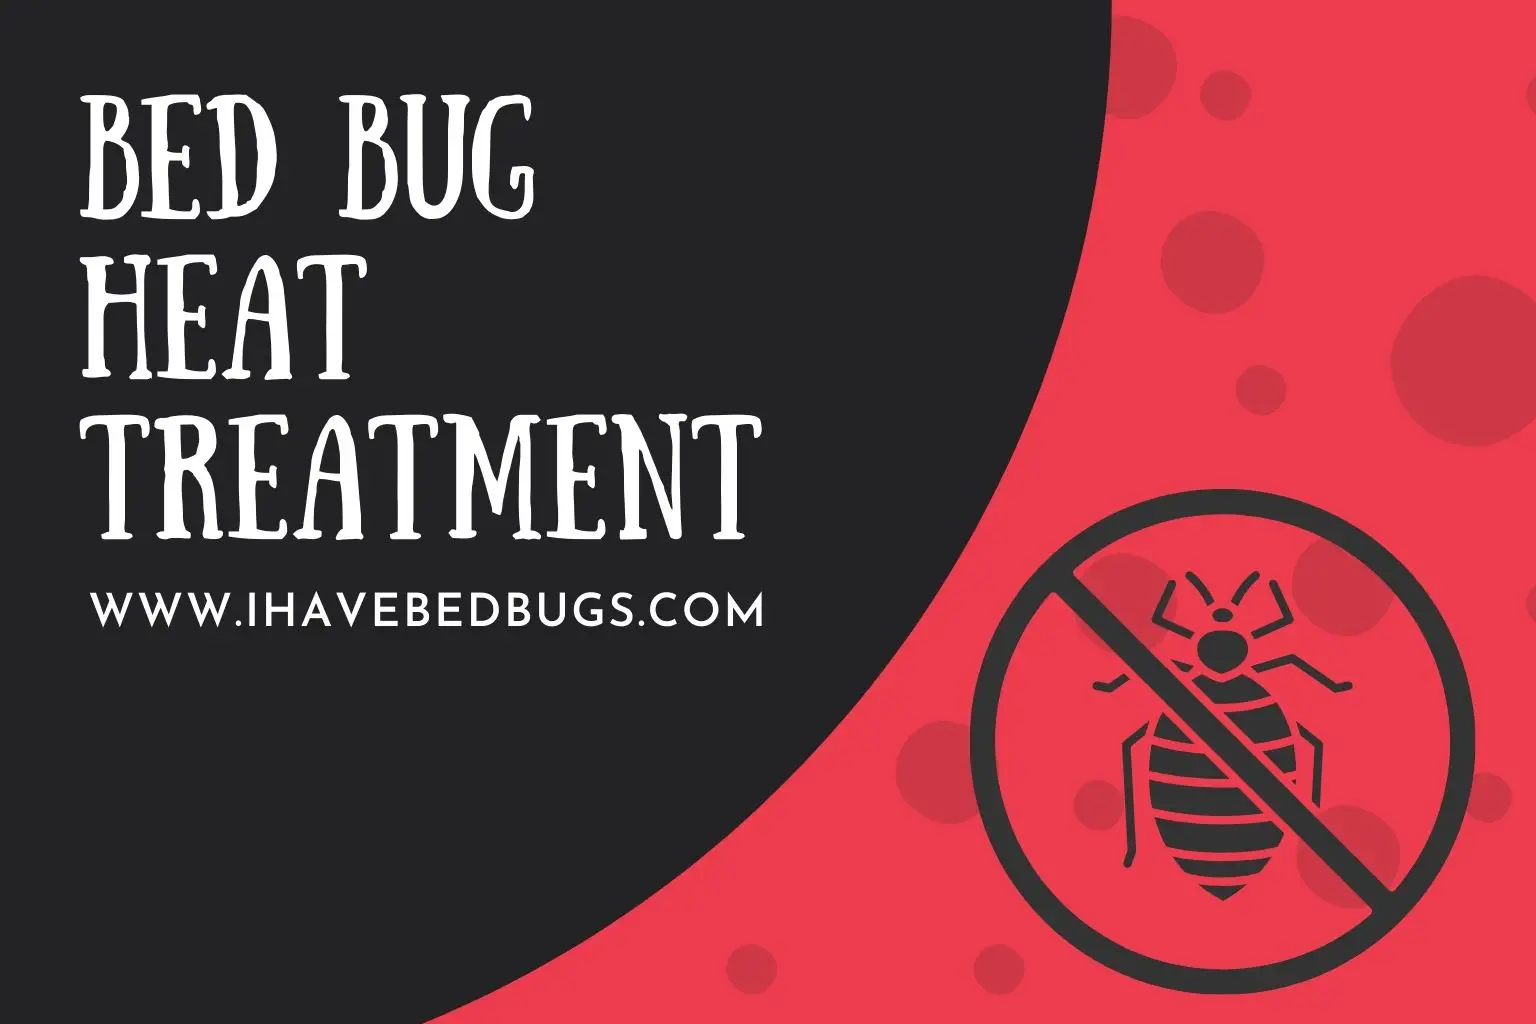 Bed Bug heat treatment: Cost, Success Rate, DIY, Preparation & More